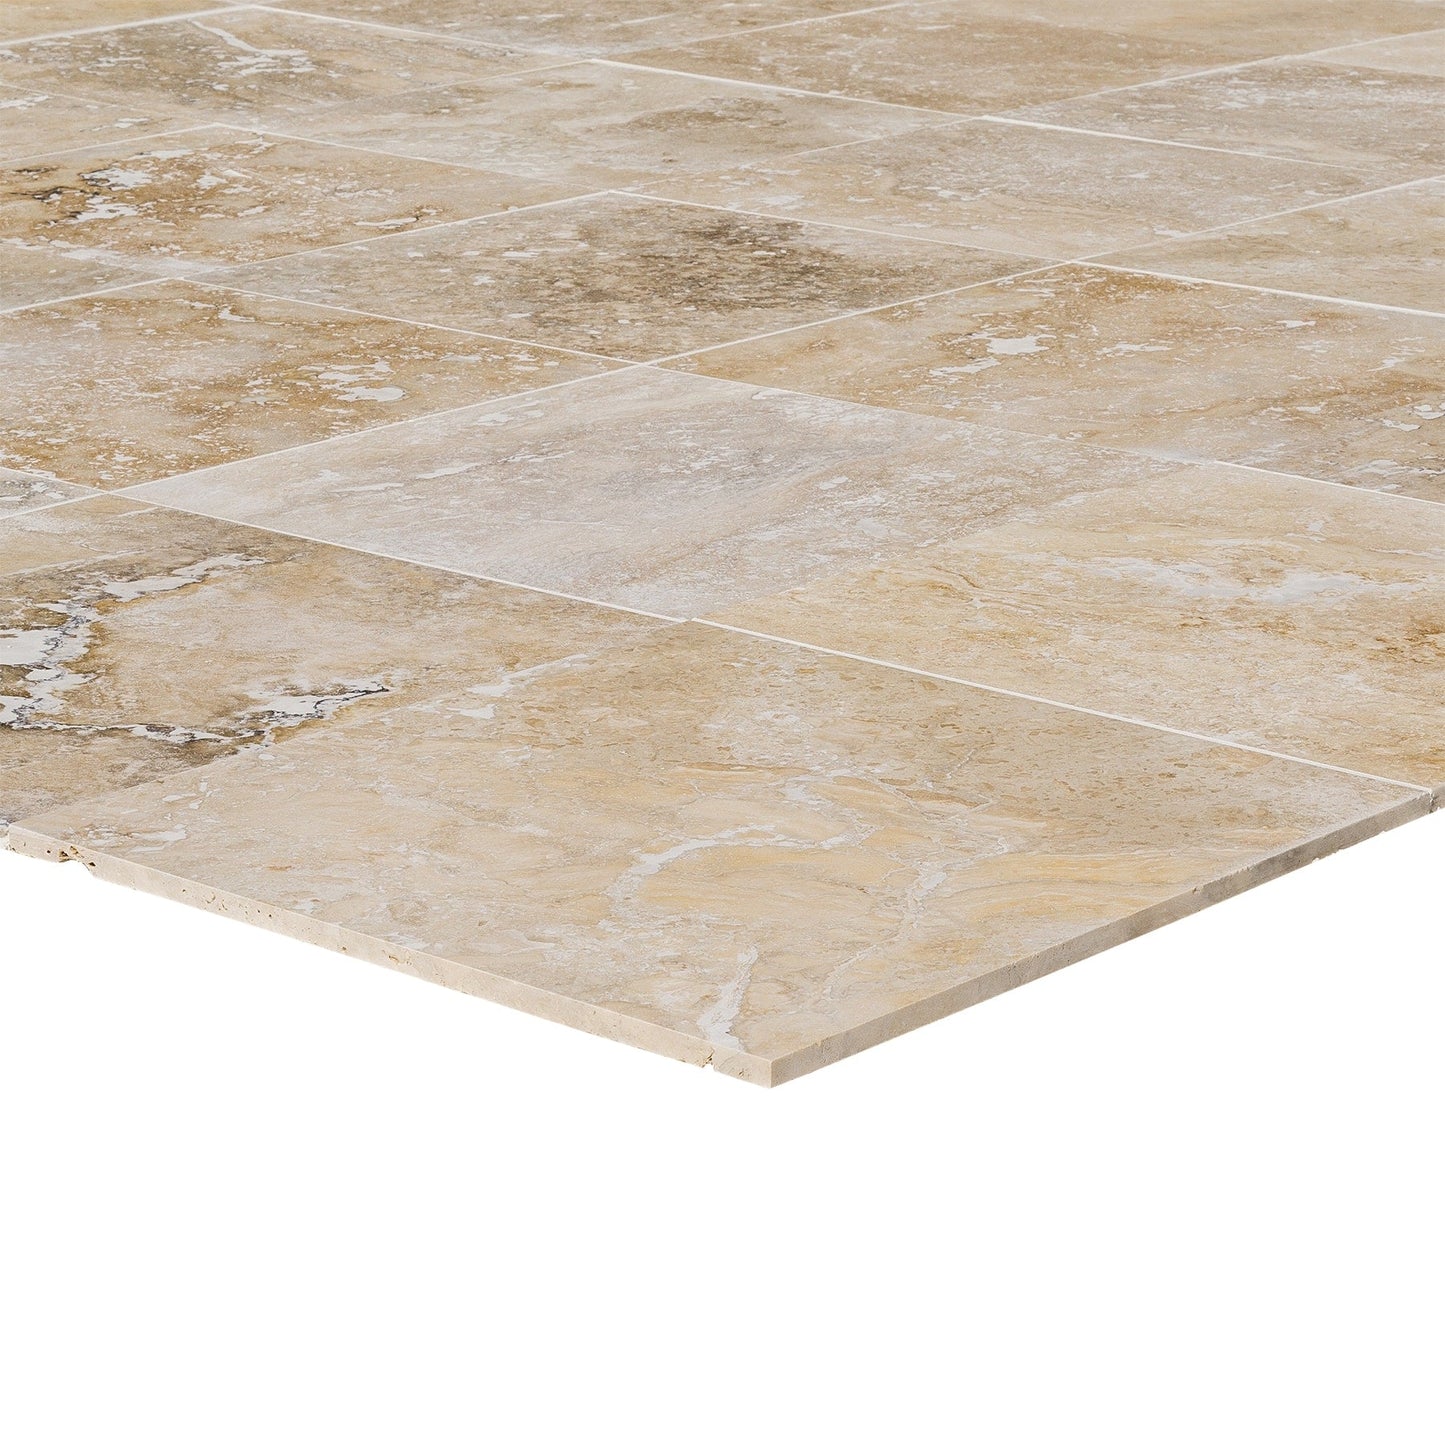 Travertine Tiles - Honed and Filled